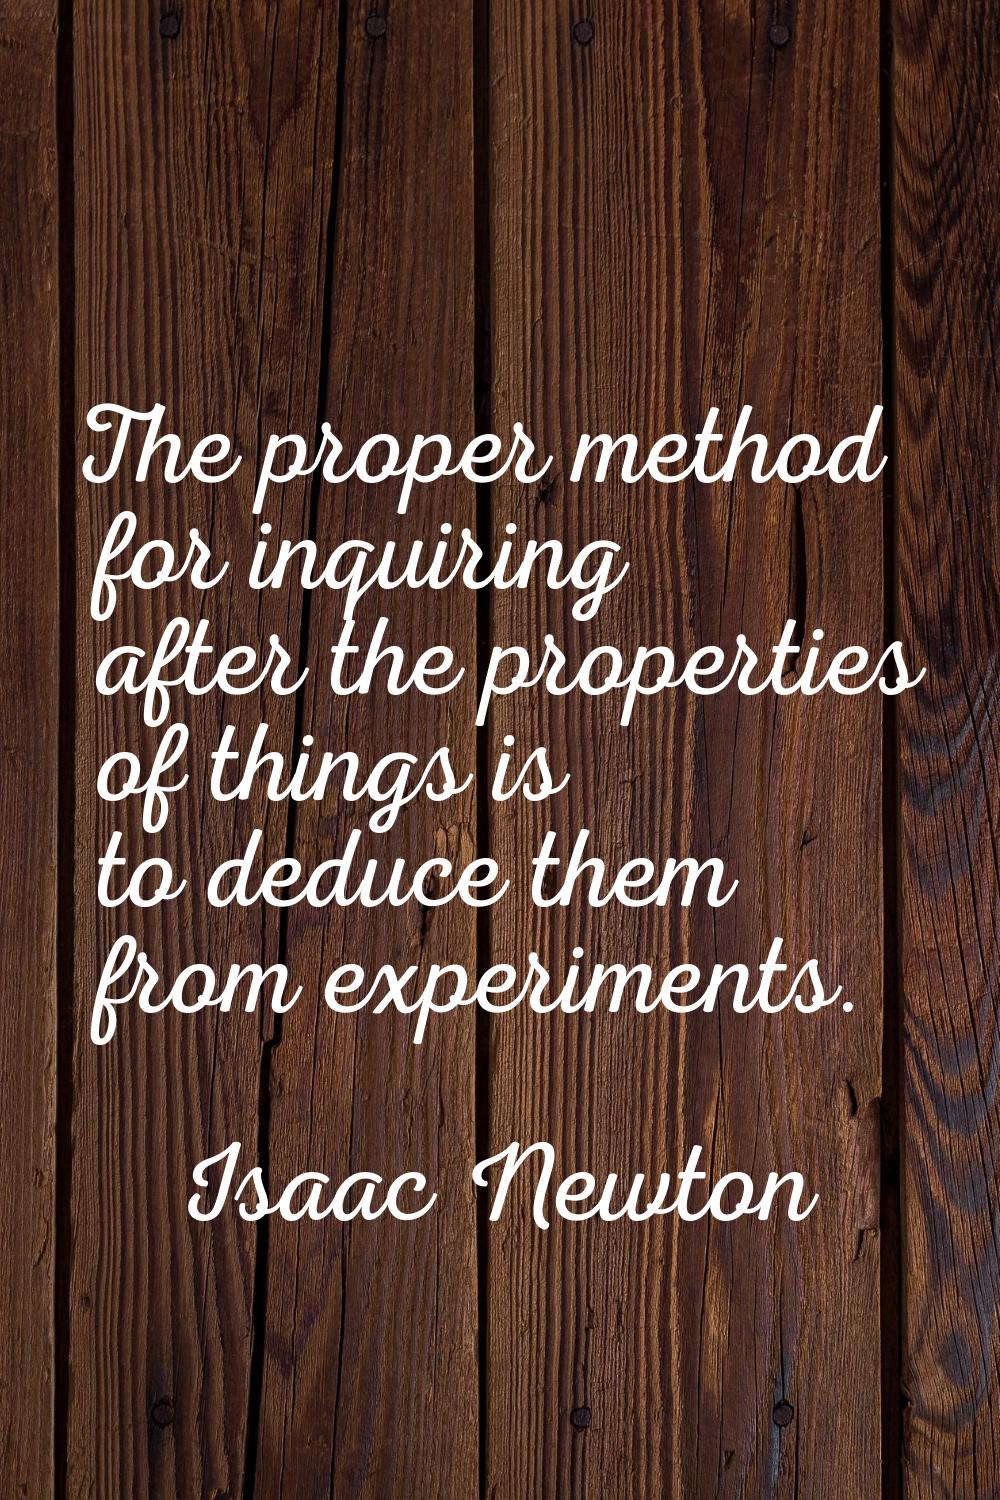 The proper method for inquiring after the properties of things is to deduce them from experiments.